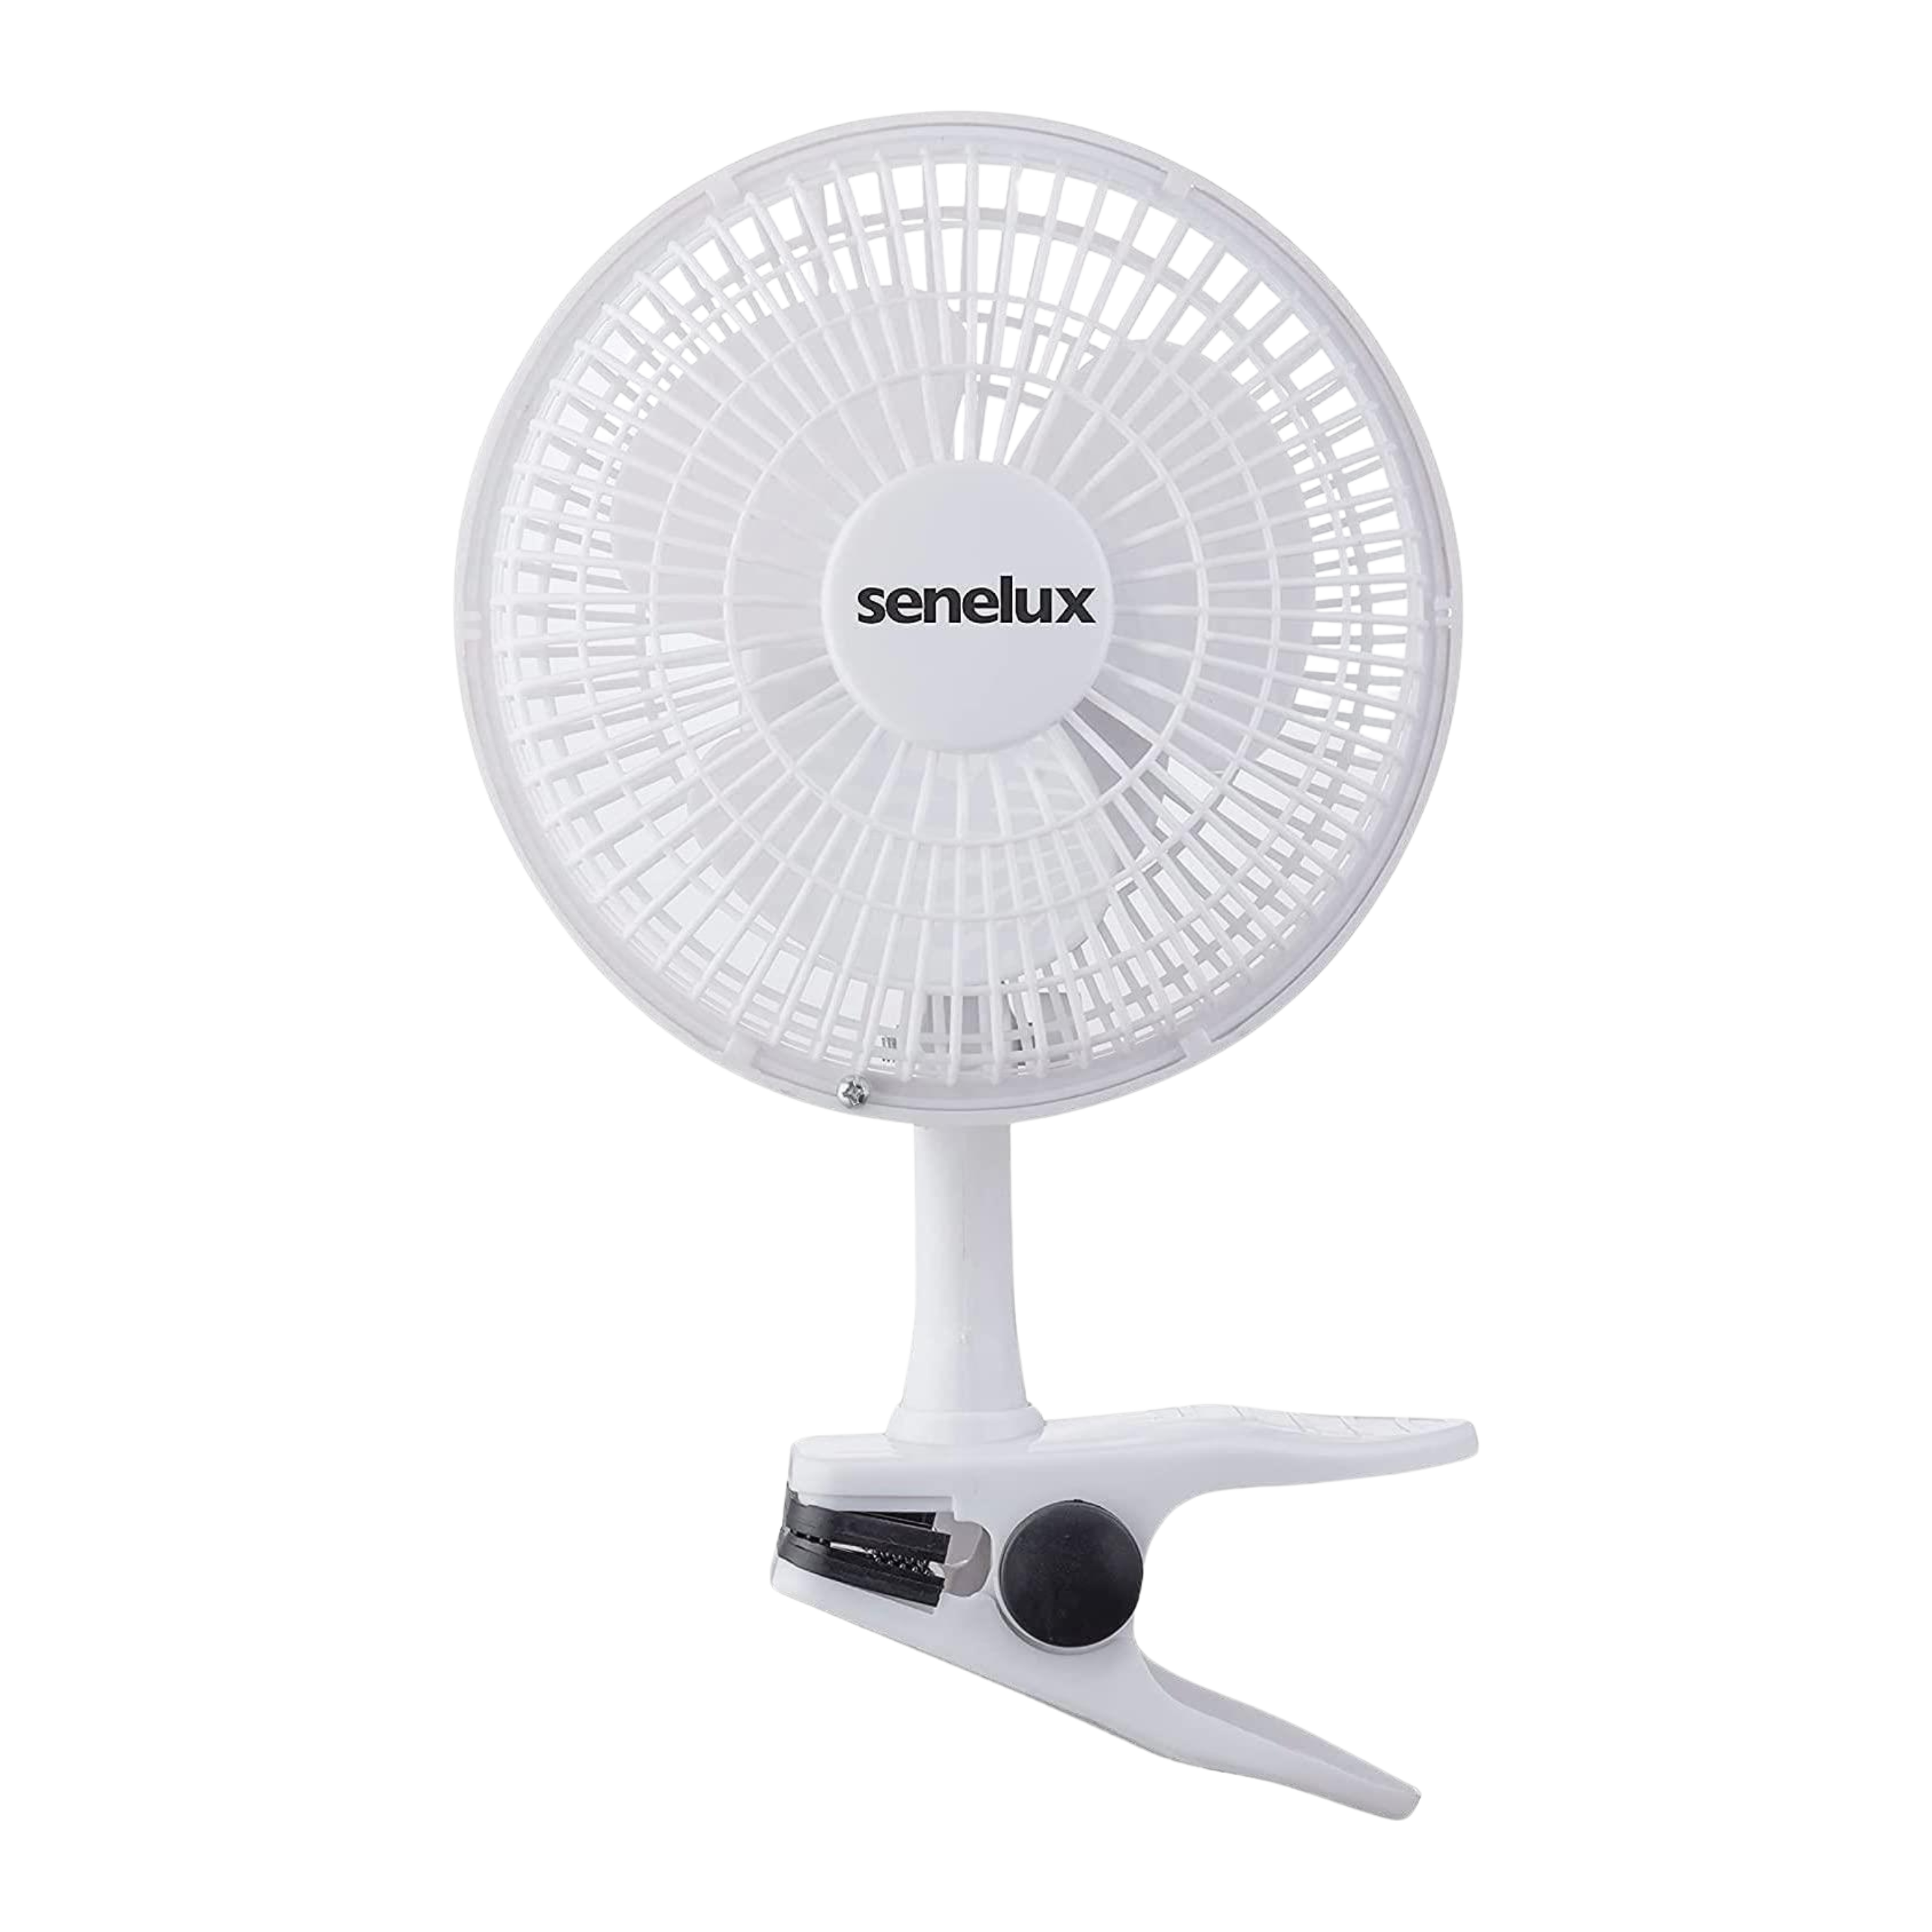 An image of the Senelux 6 inch clip on fan with rubberized clip located on the bottom with black, protective rubber.